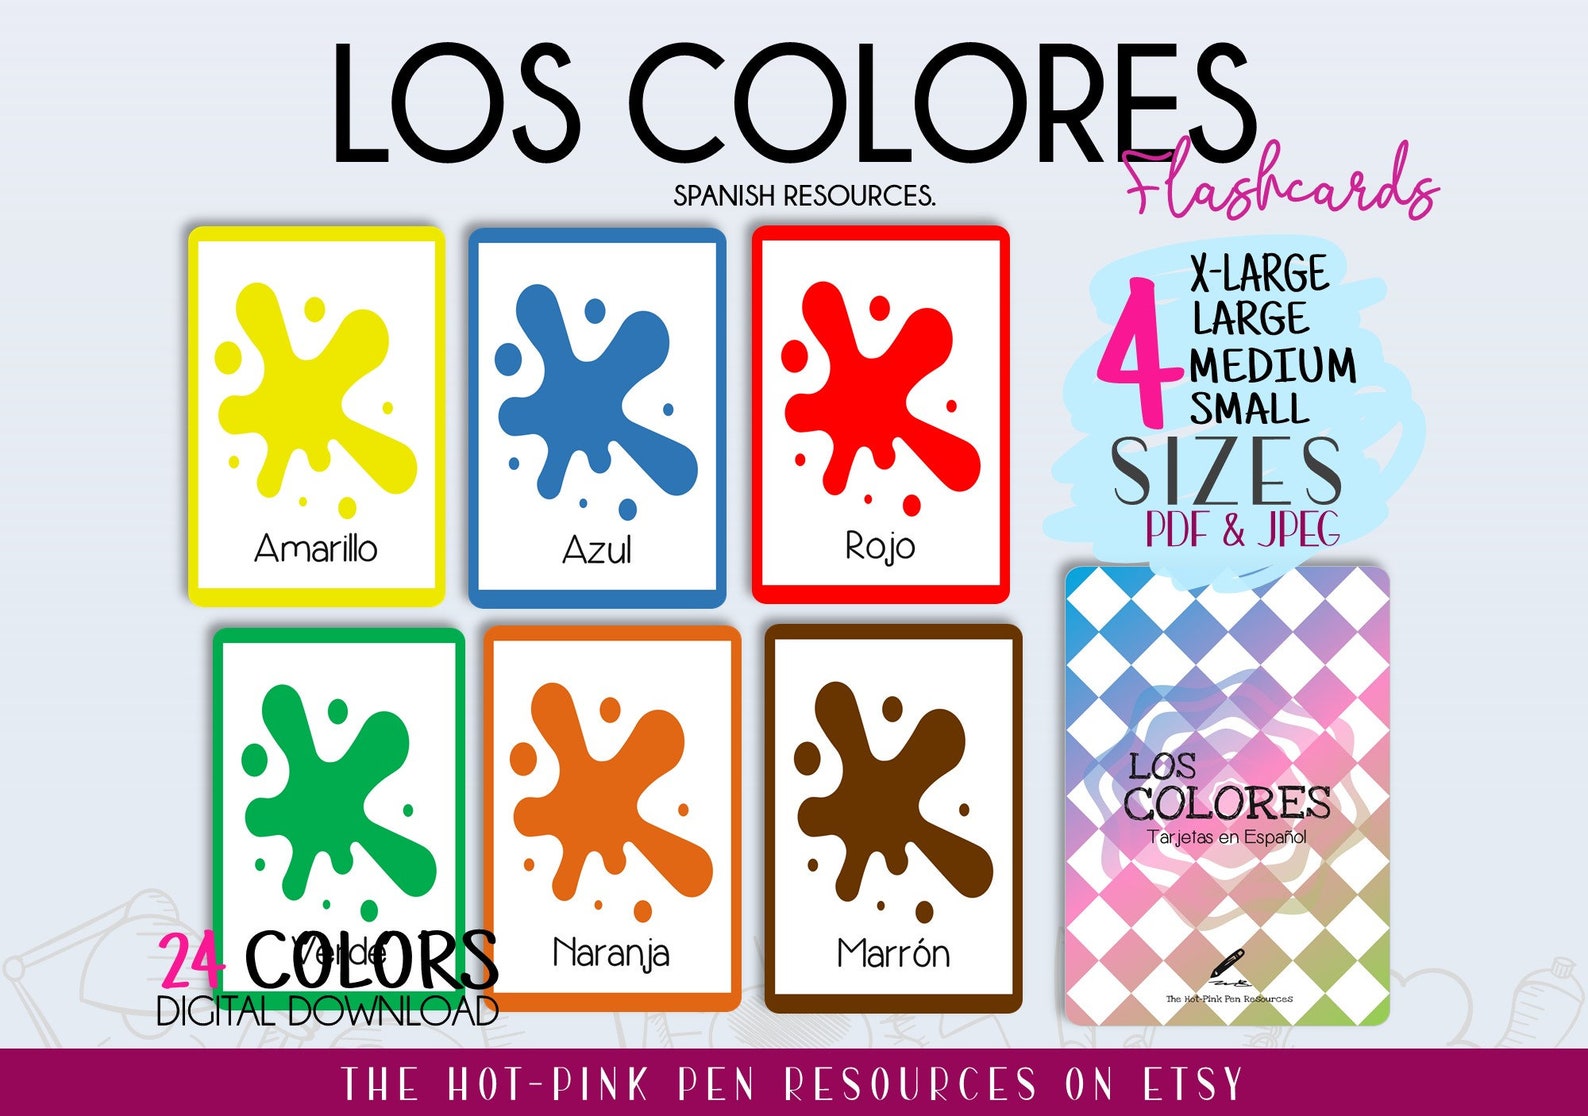 los-colores-flashcards-in-spanish-spanish-colors-flashcards-spanish-ele